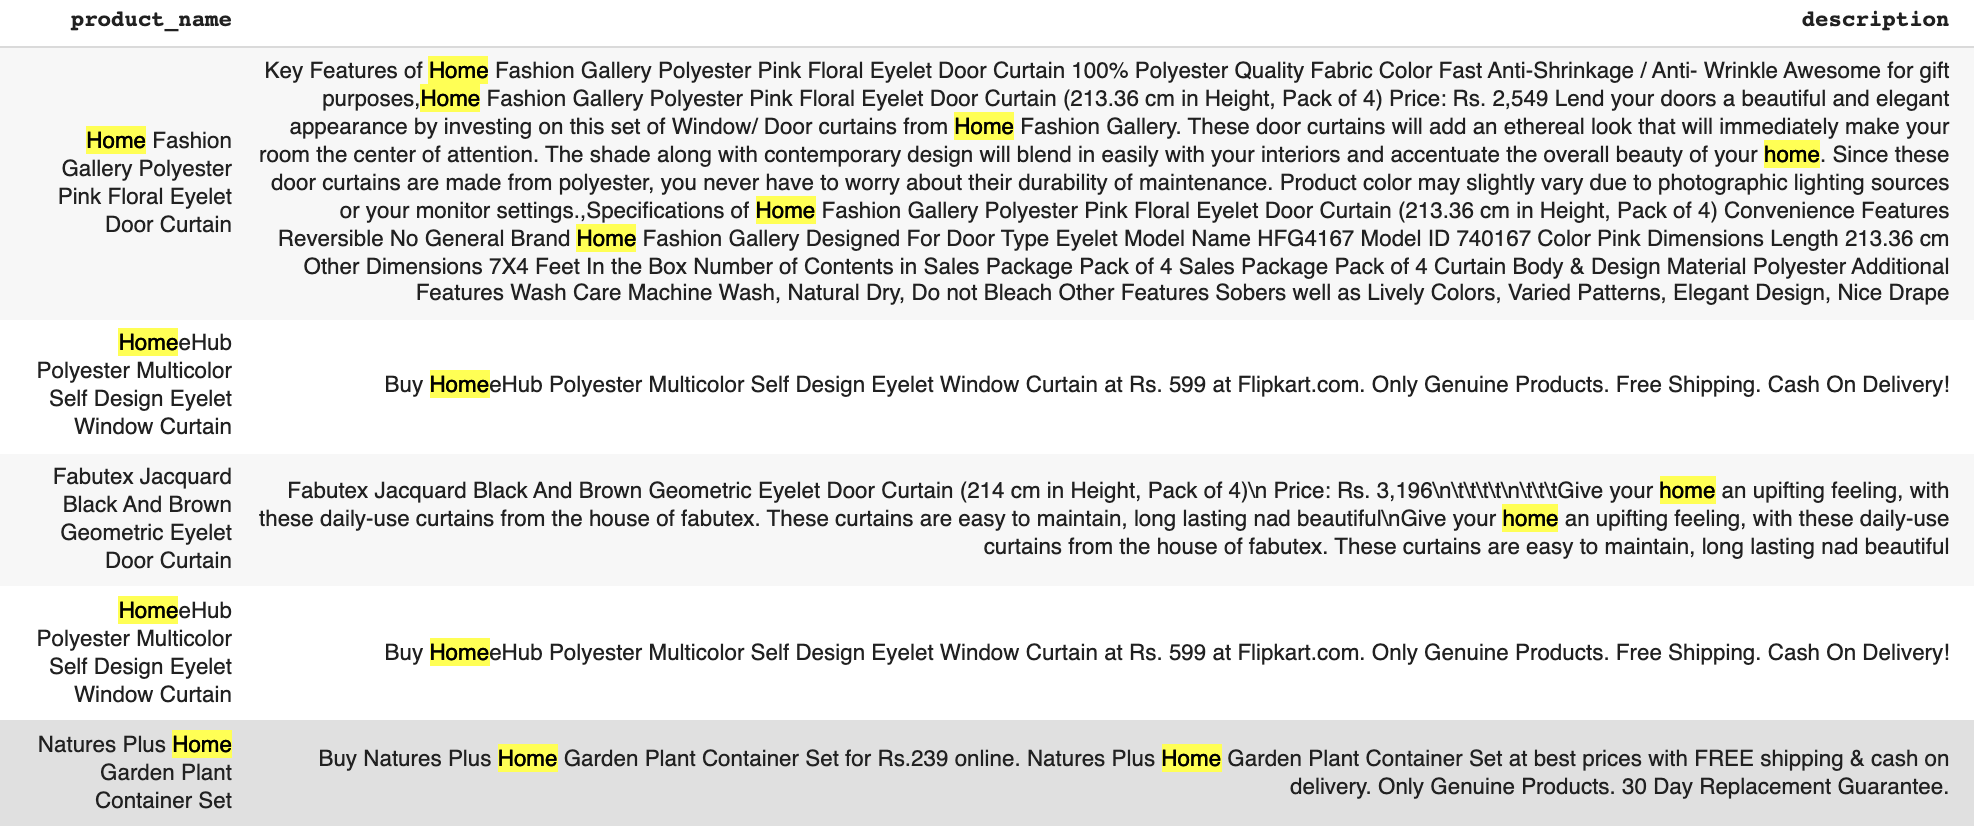 Filtering documents matching "Home curtain" in the description field.